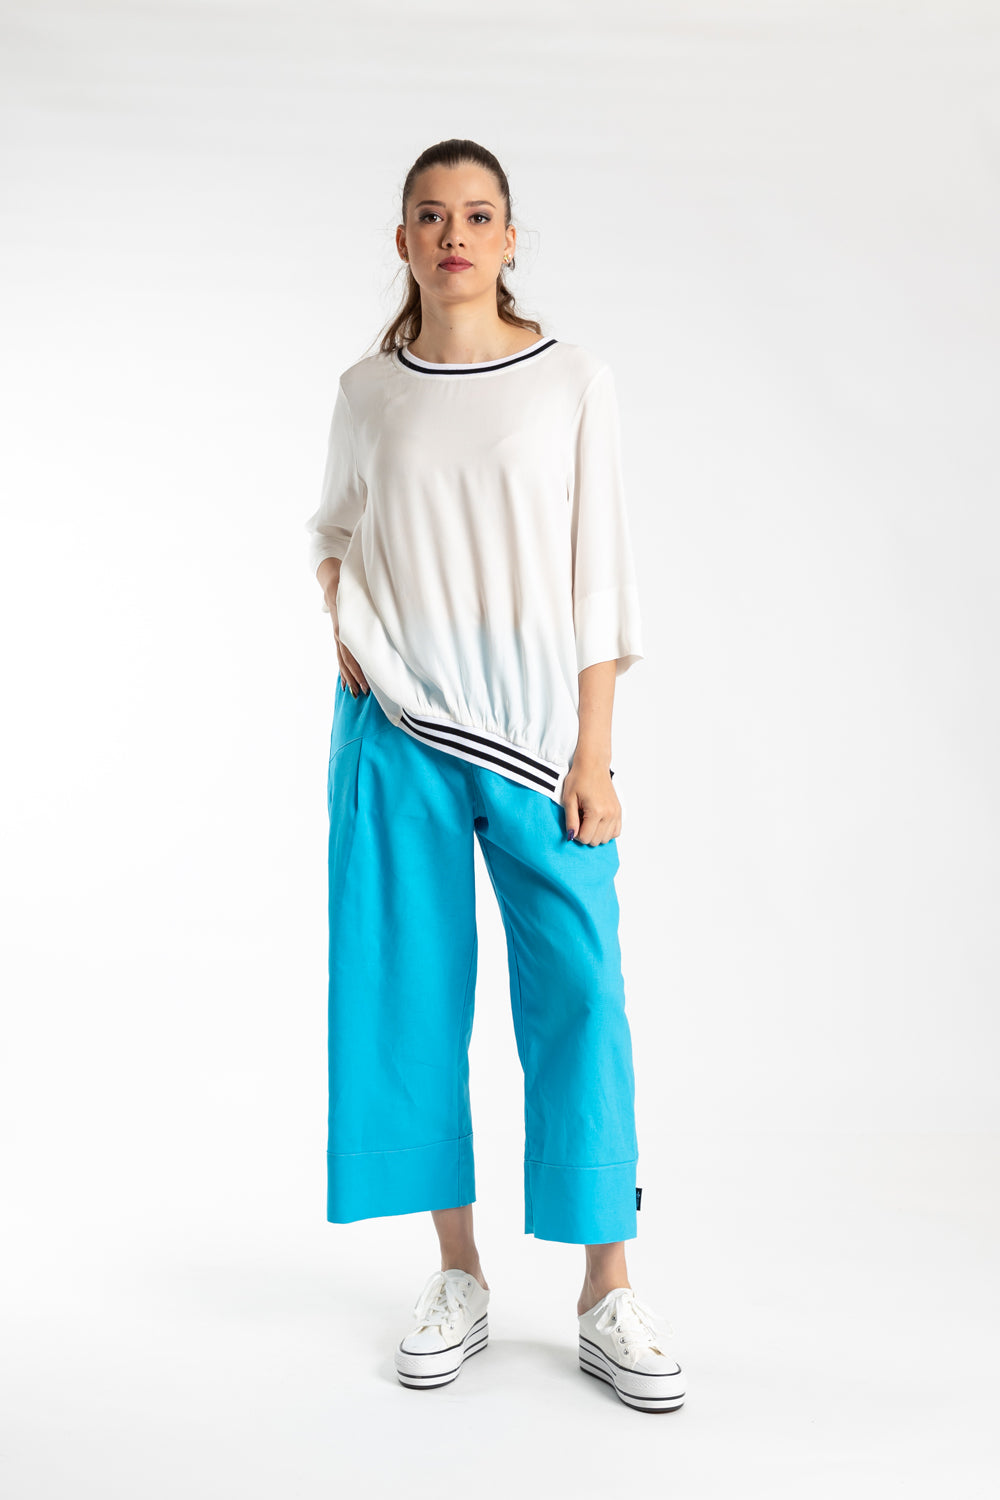 JELLICOE TEAL PANTS - THE VOGUE STORE